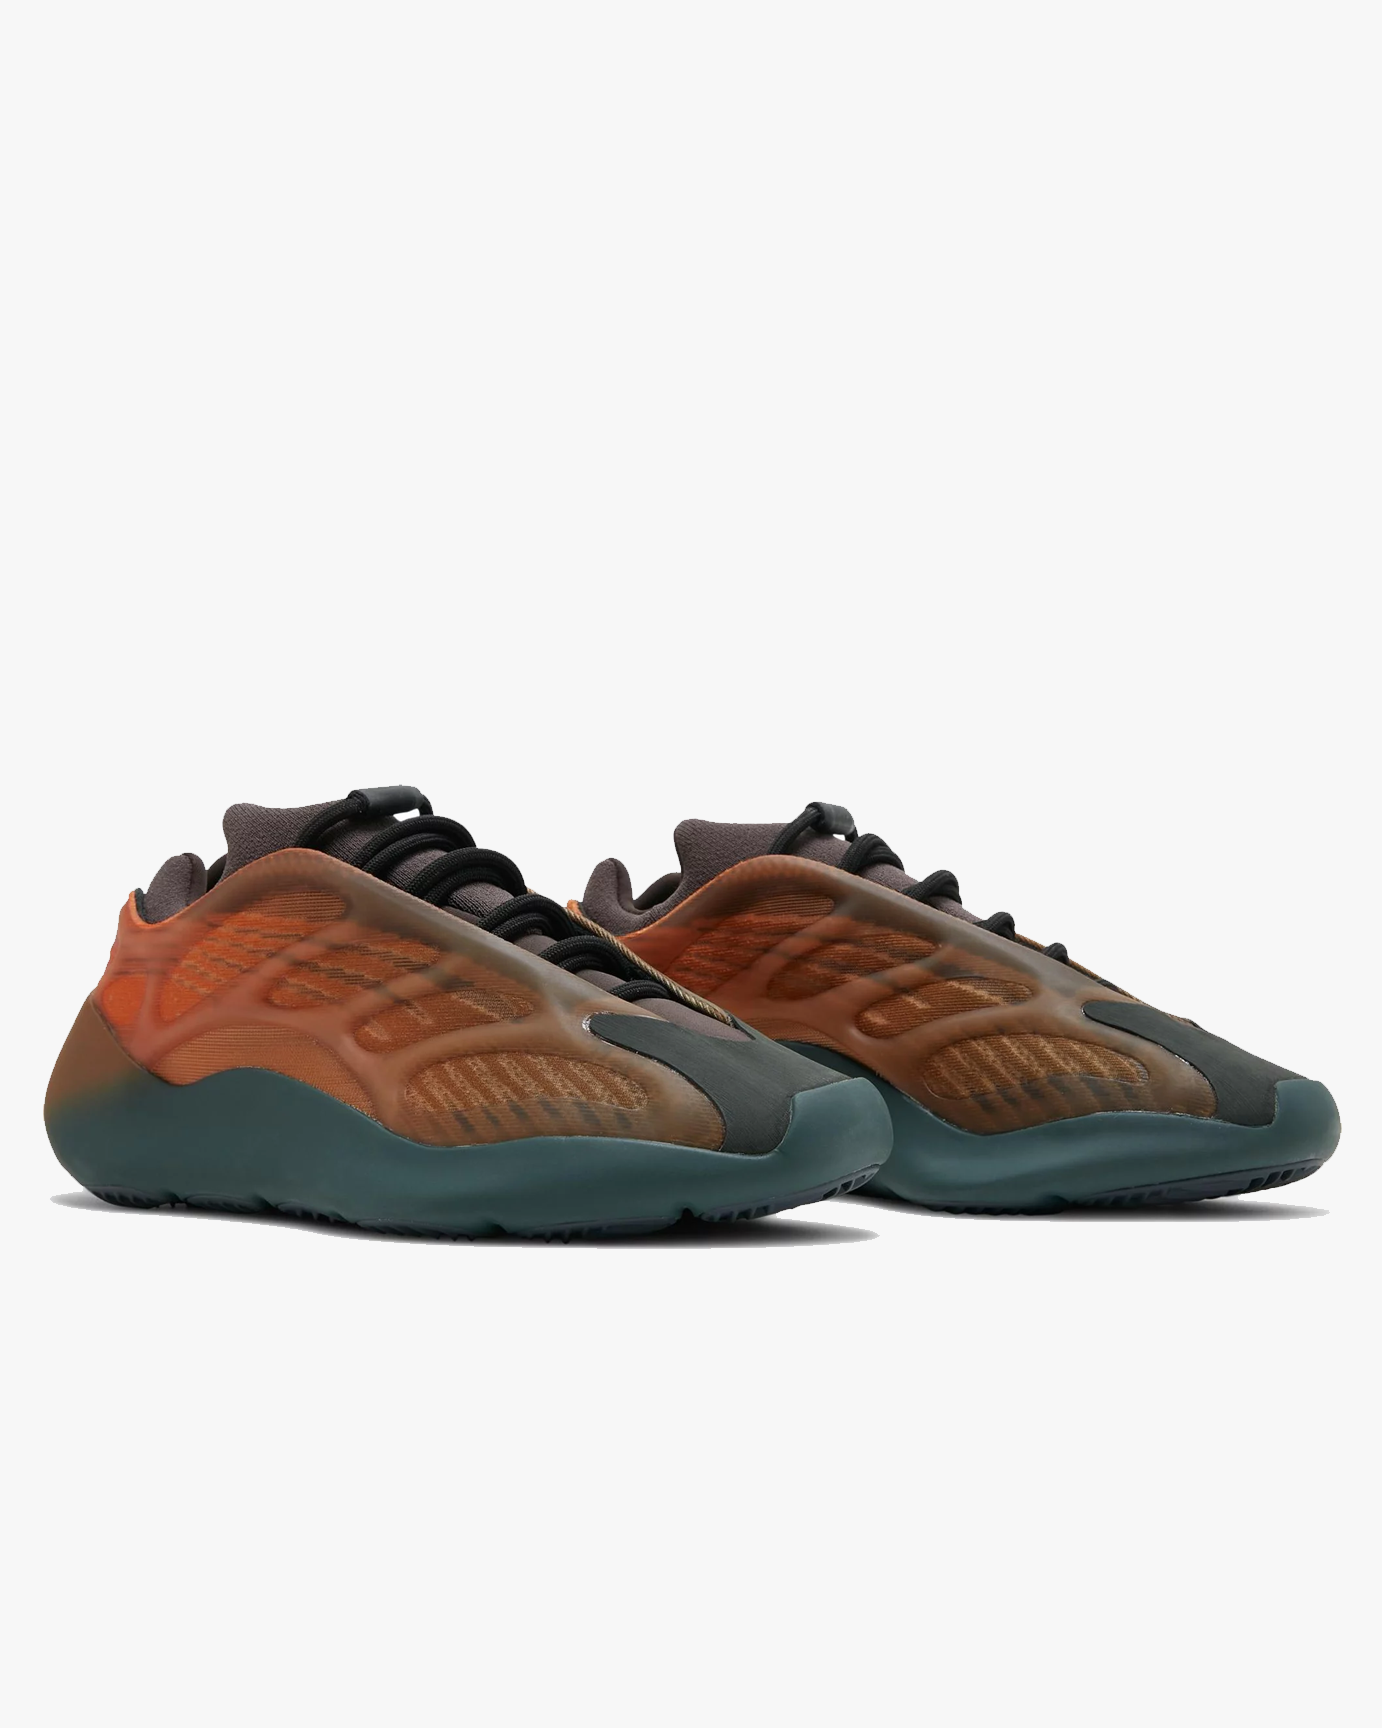 Yeezy Boost 700 V3 'Copper Fade'